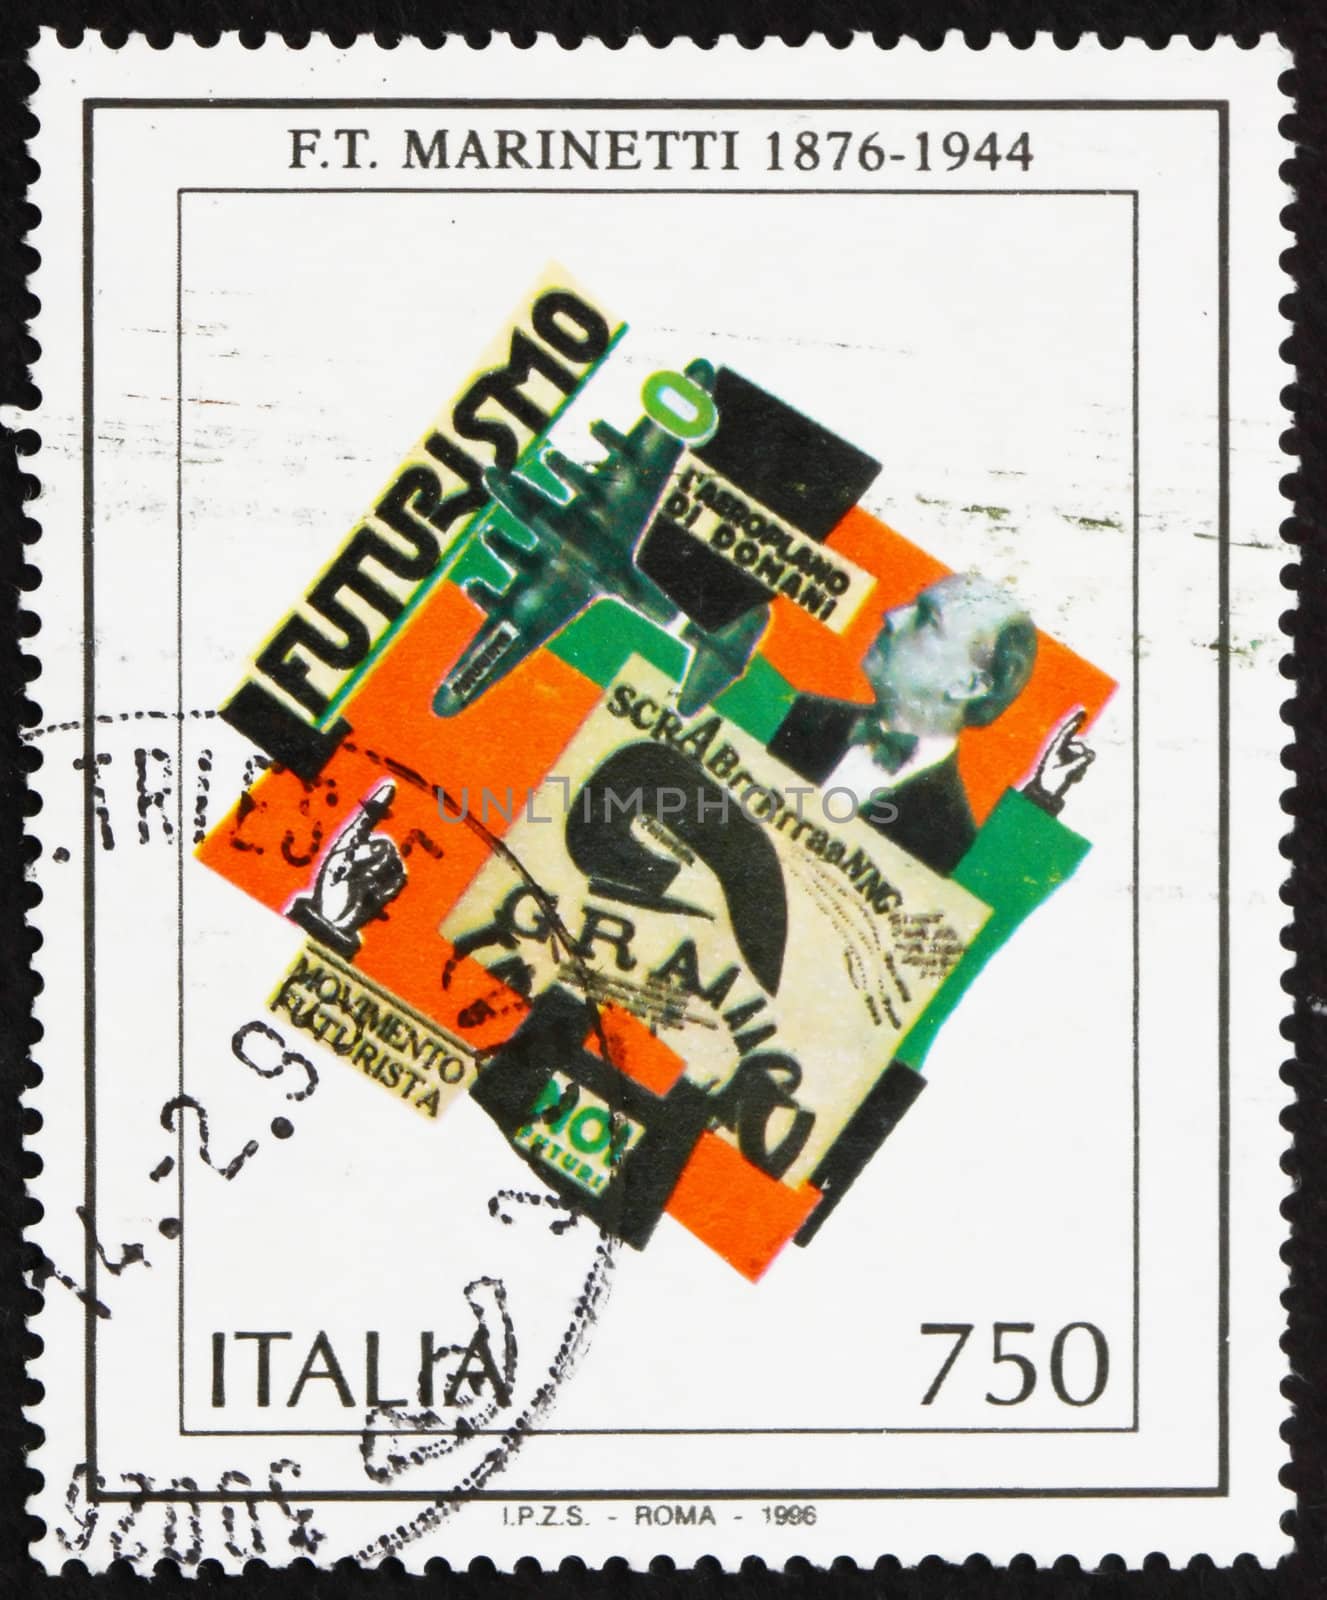 ITALY - CIRCA 1996: a stamp printed in the Italy shows F. T. Marinetti, Poet and Ideologue, circa 1996